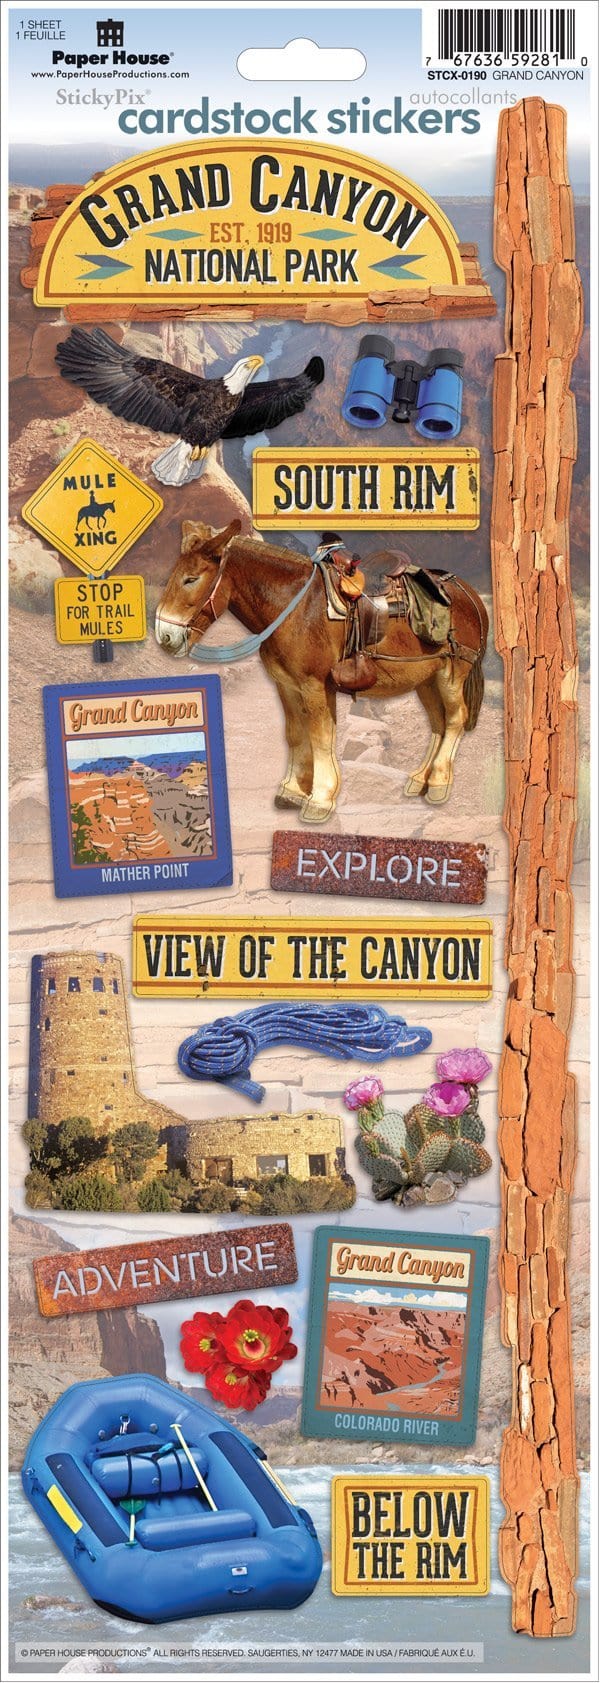 Grand Canyon Cardstock Stickers